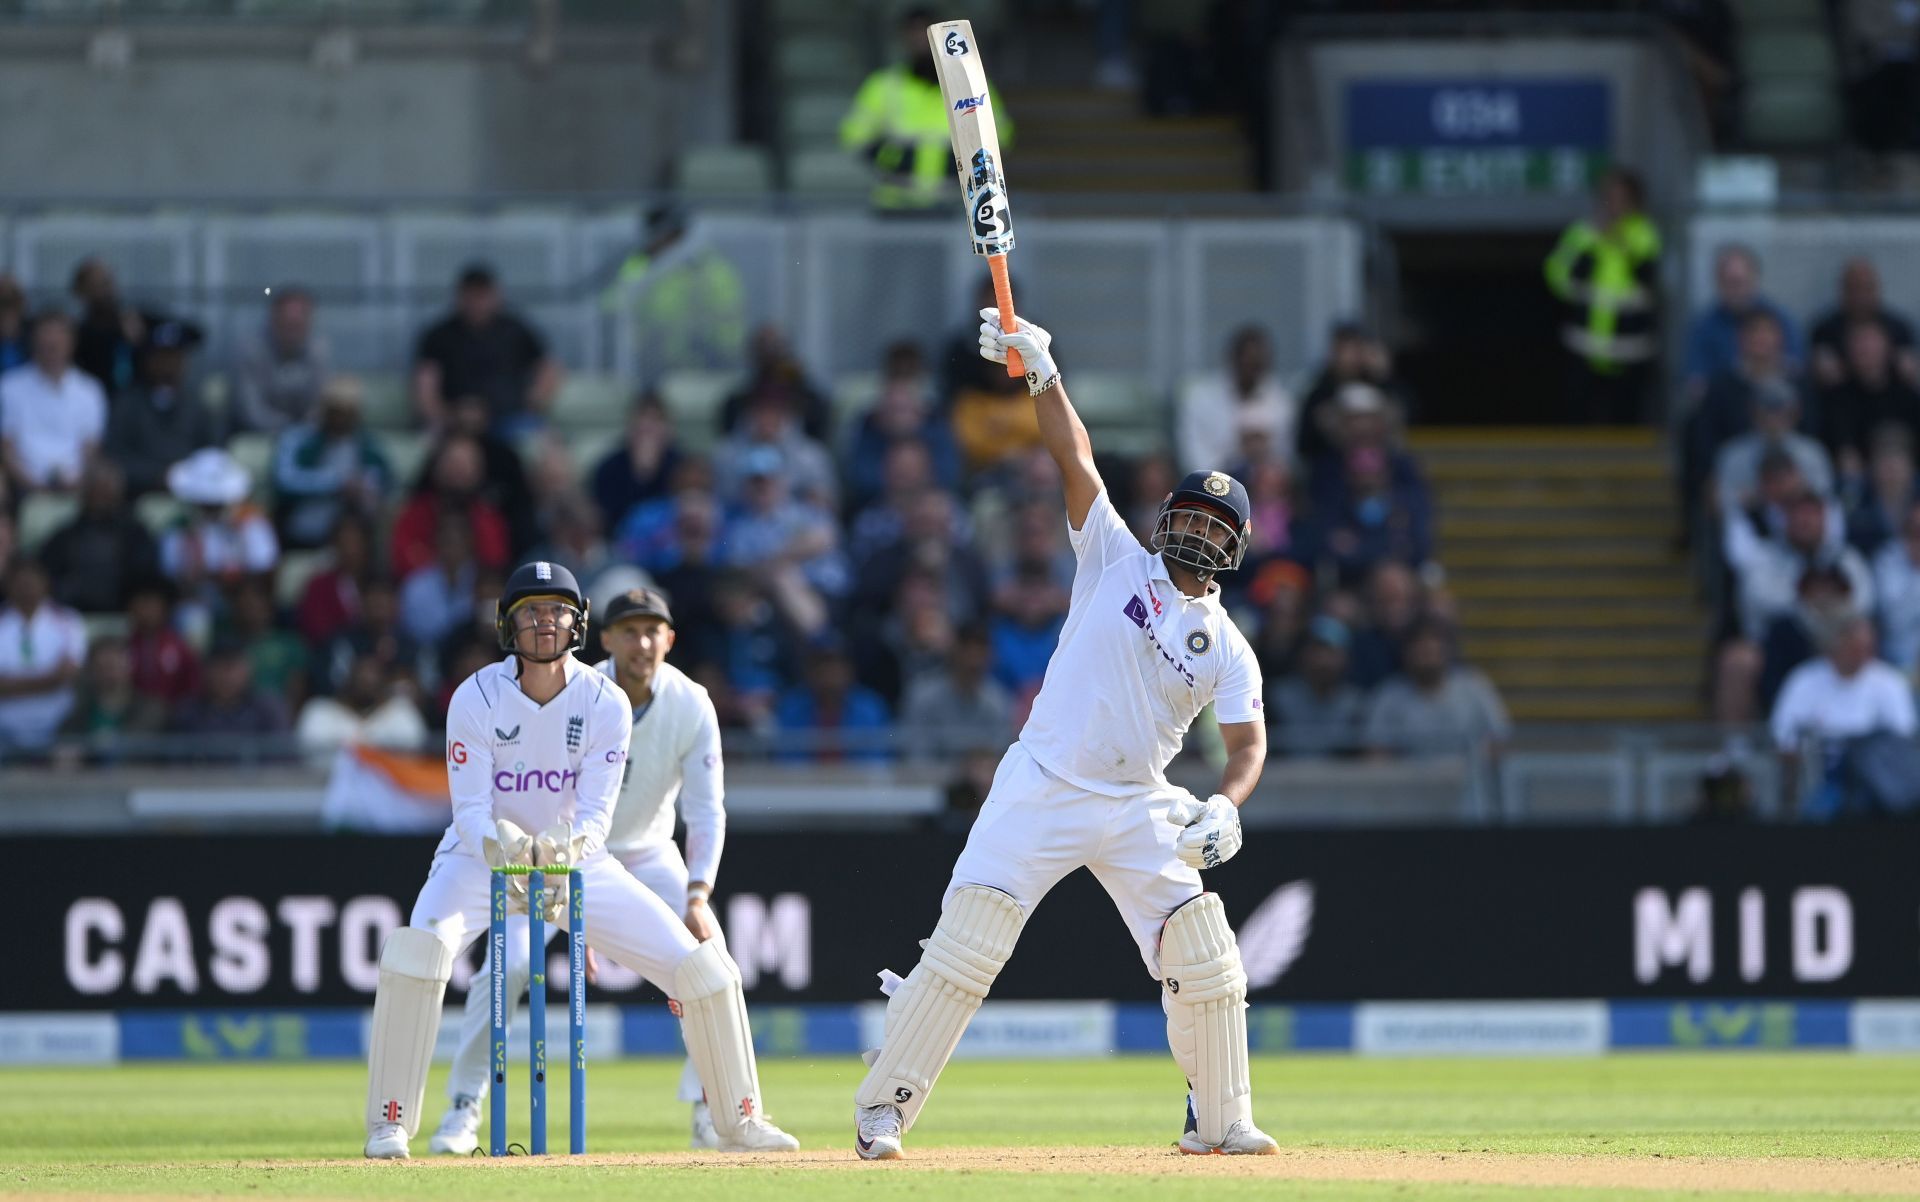 The keeper-batter scored a sensational hundred in Birmingham. Pic: Getty Images